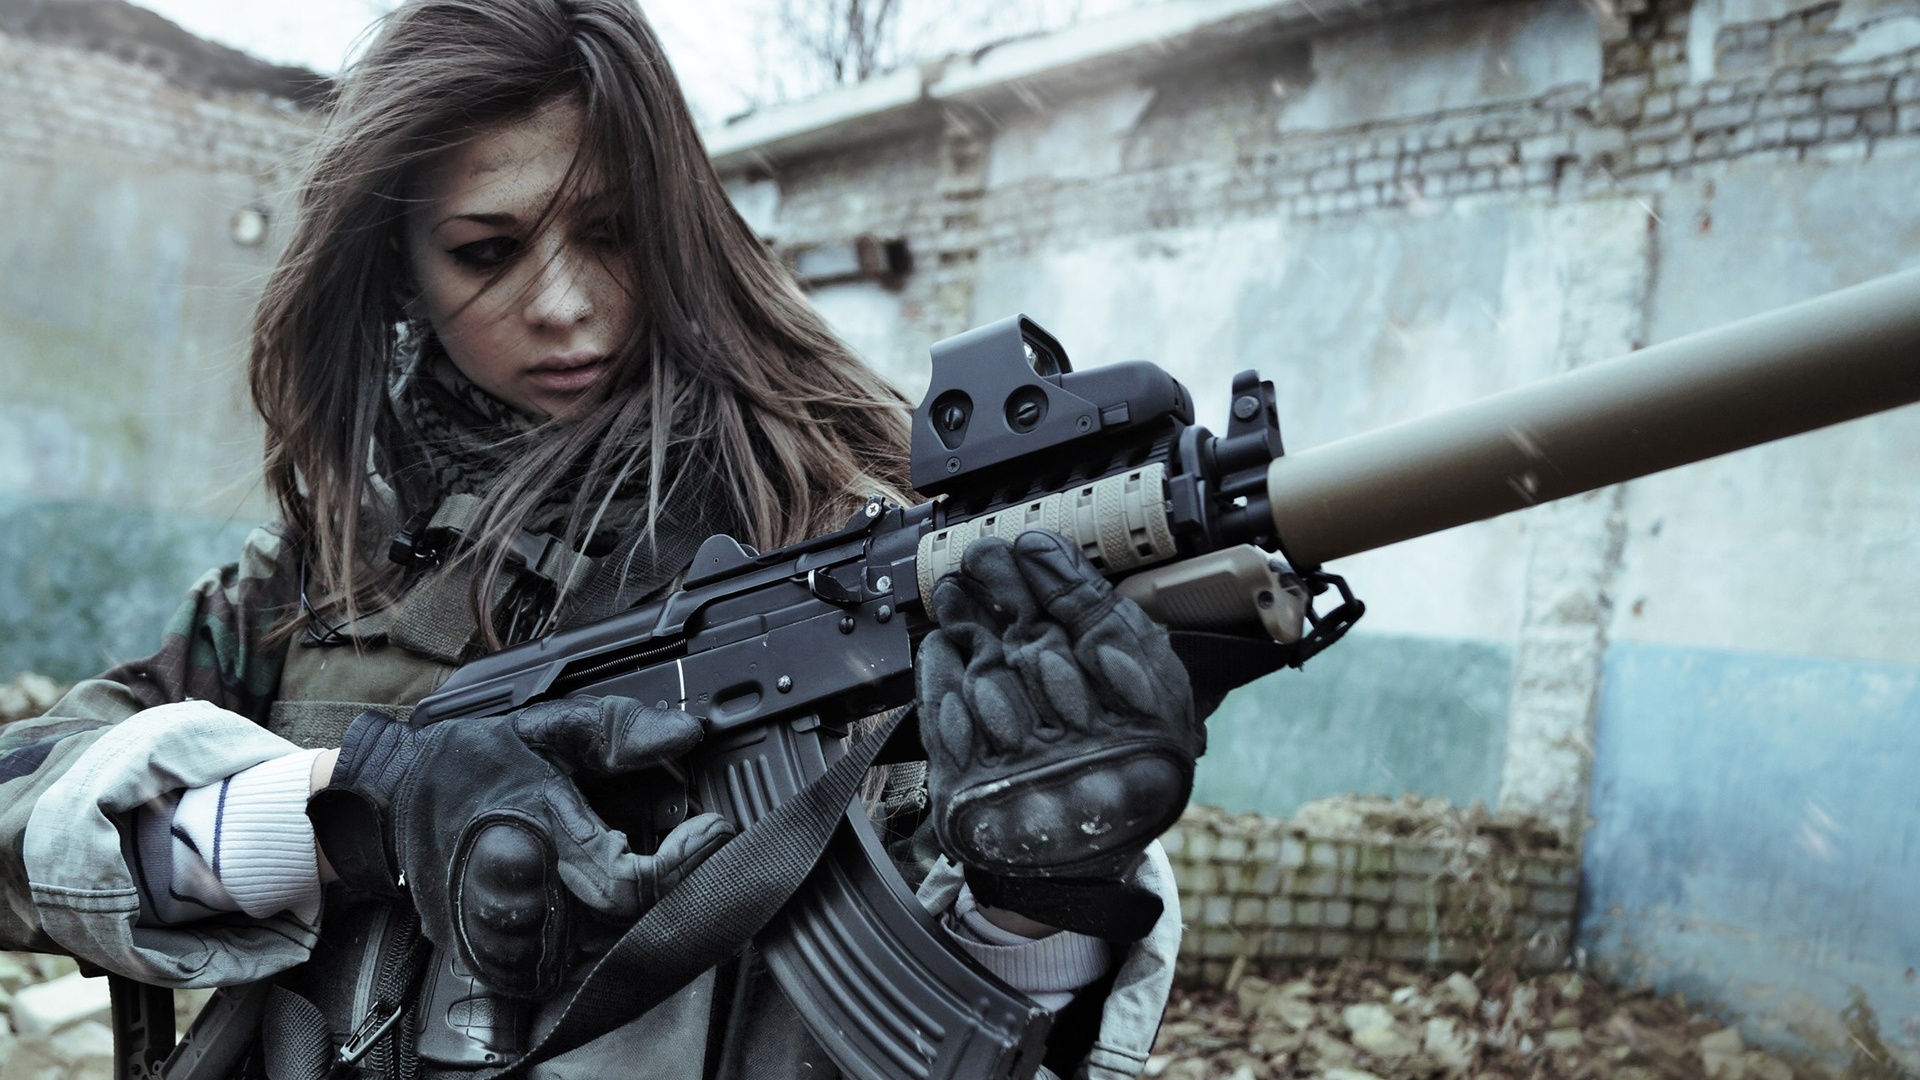 Awesome Girl With Gun Widescreen High Resolution For